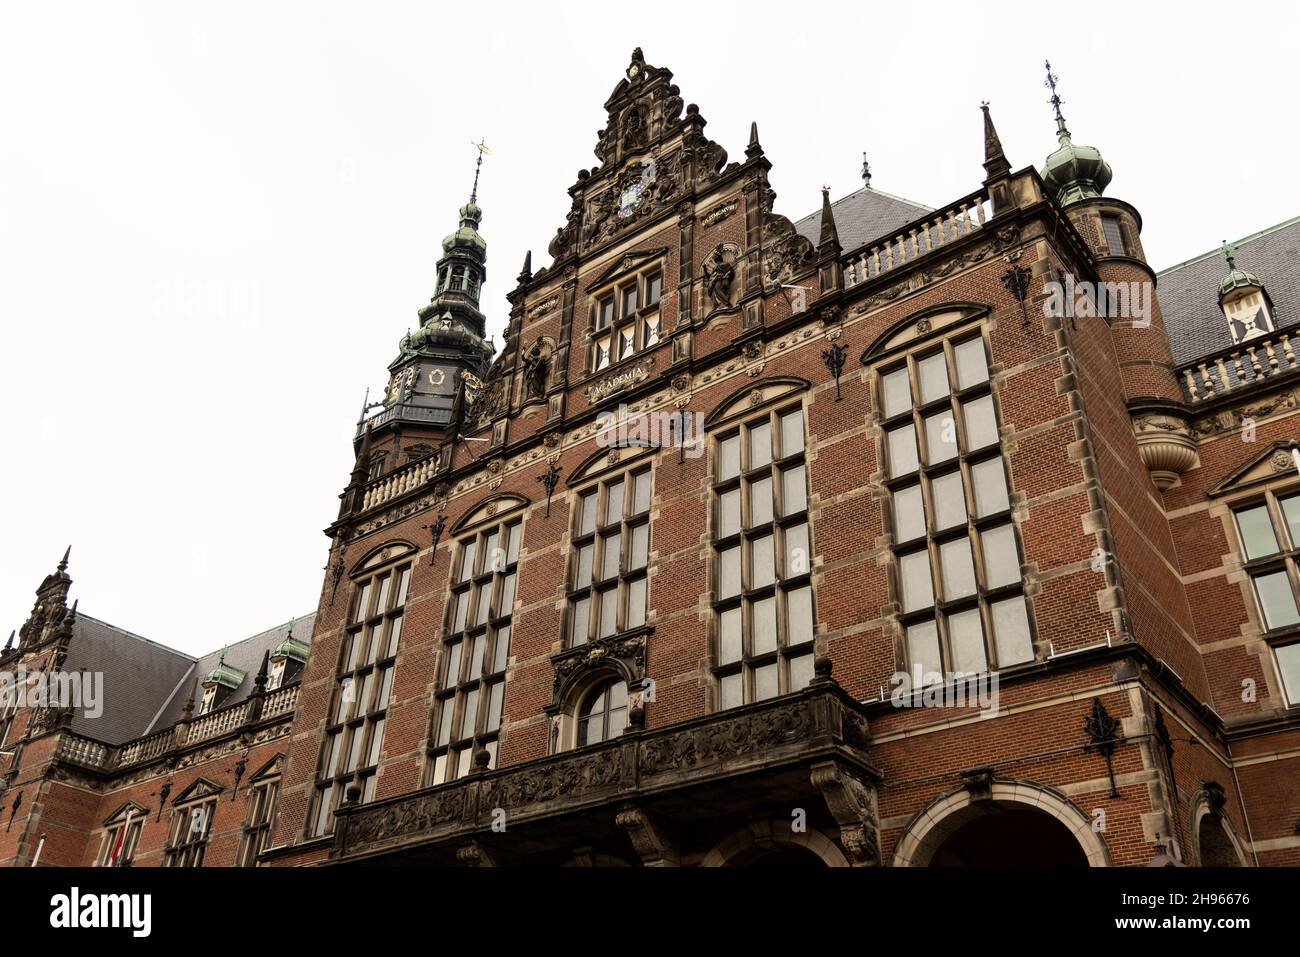 The Academy Building at the University of Groningen in the Netherlands. The city center building houses the university administration. Stock Photo